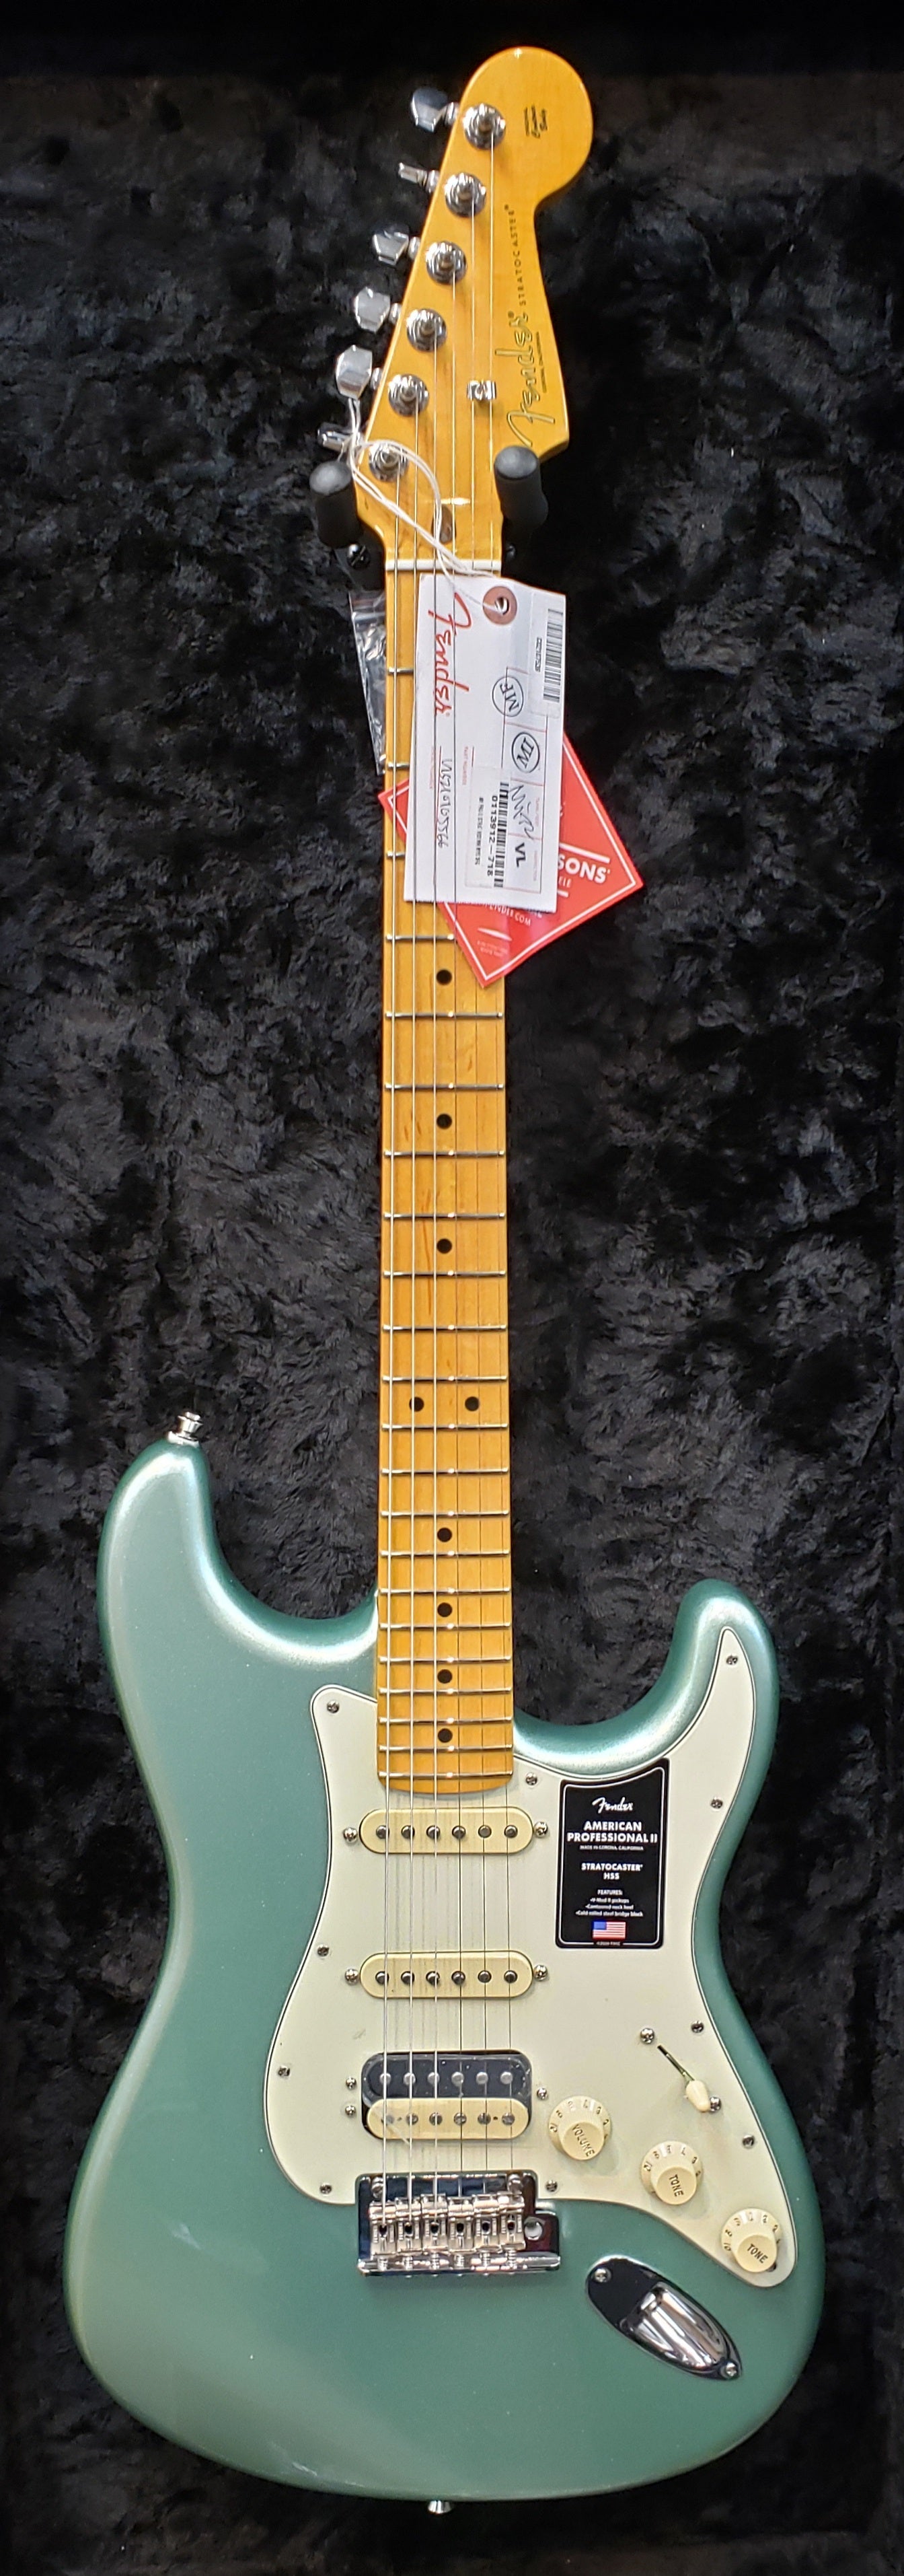 Fender American Professional II Stratocaster HSS Maple Fingerboard Mystic Surf Green F-0113912718 SERIAL NUMBER US210105566 - 7.6 LBS